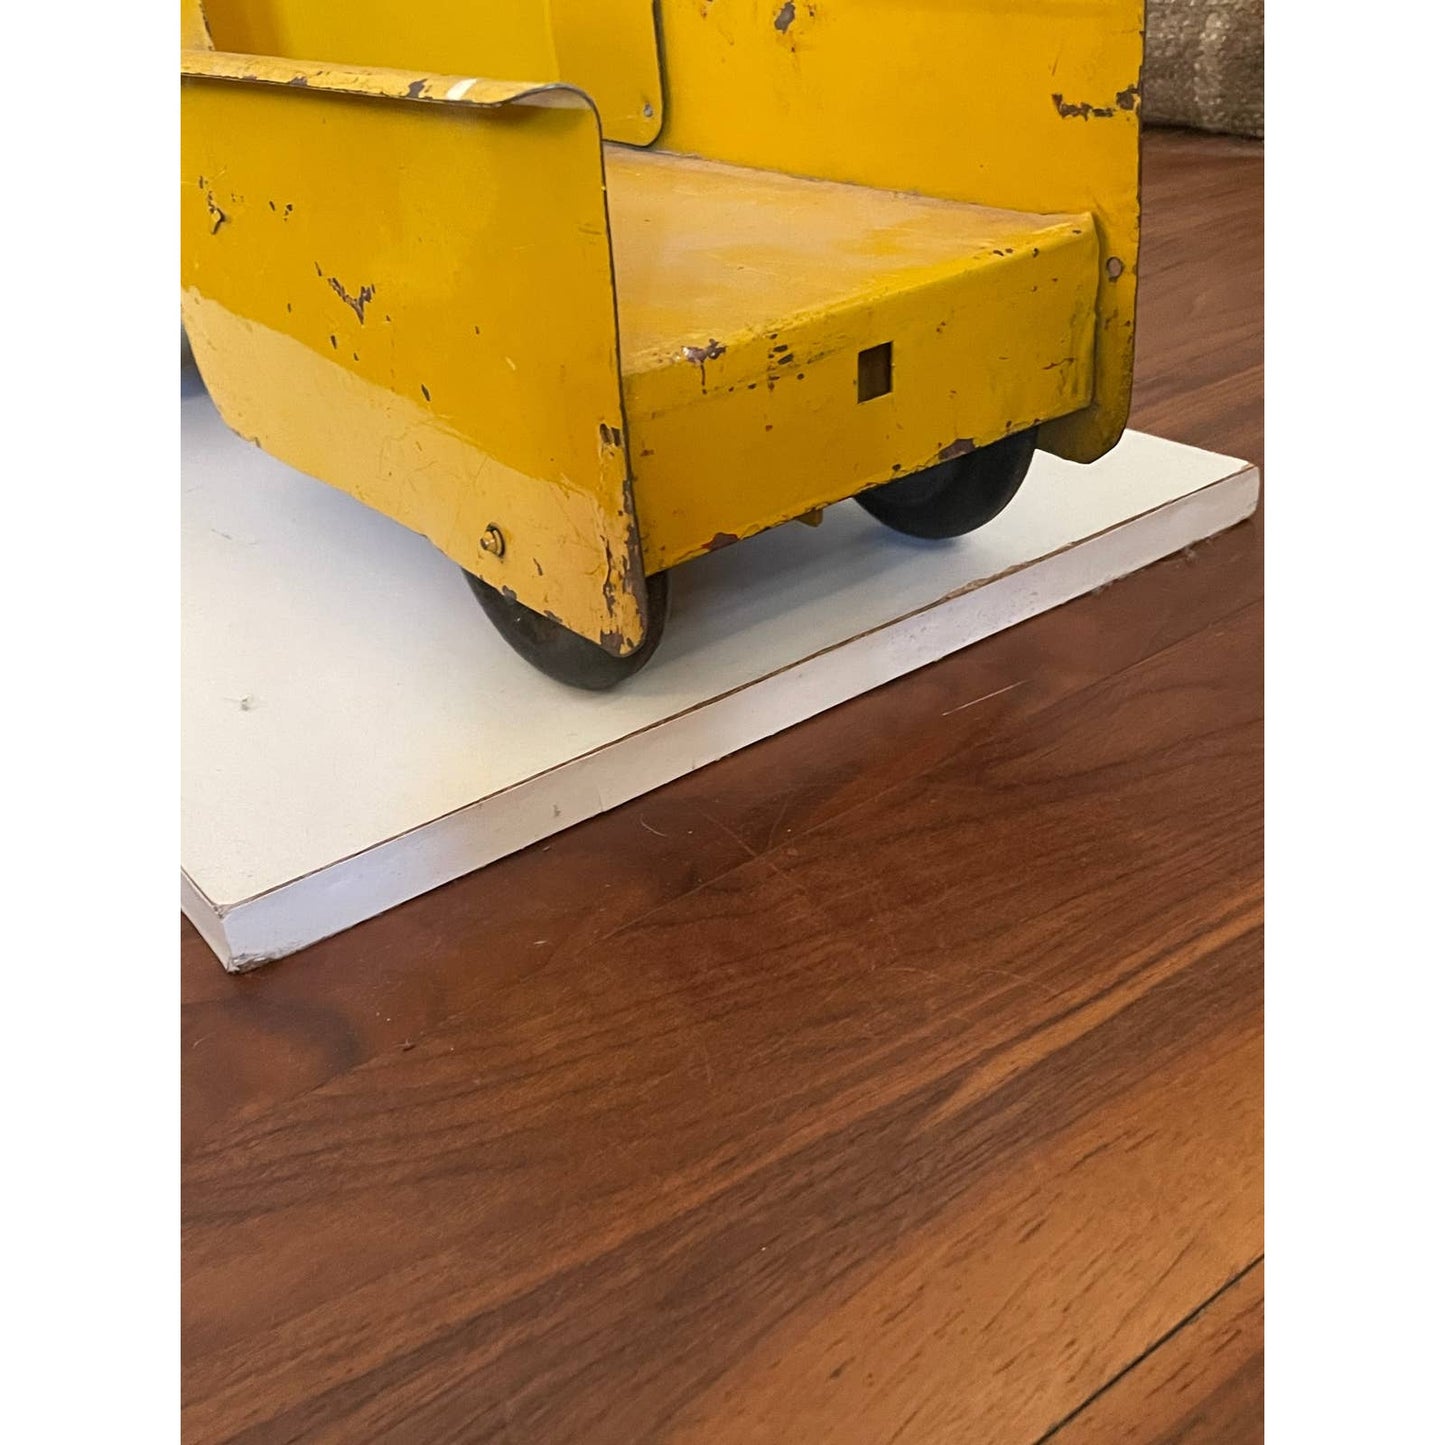 1930s/40s Pressed Steel Toy Truck back lifts up, wheels move, fully functioning